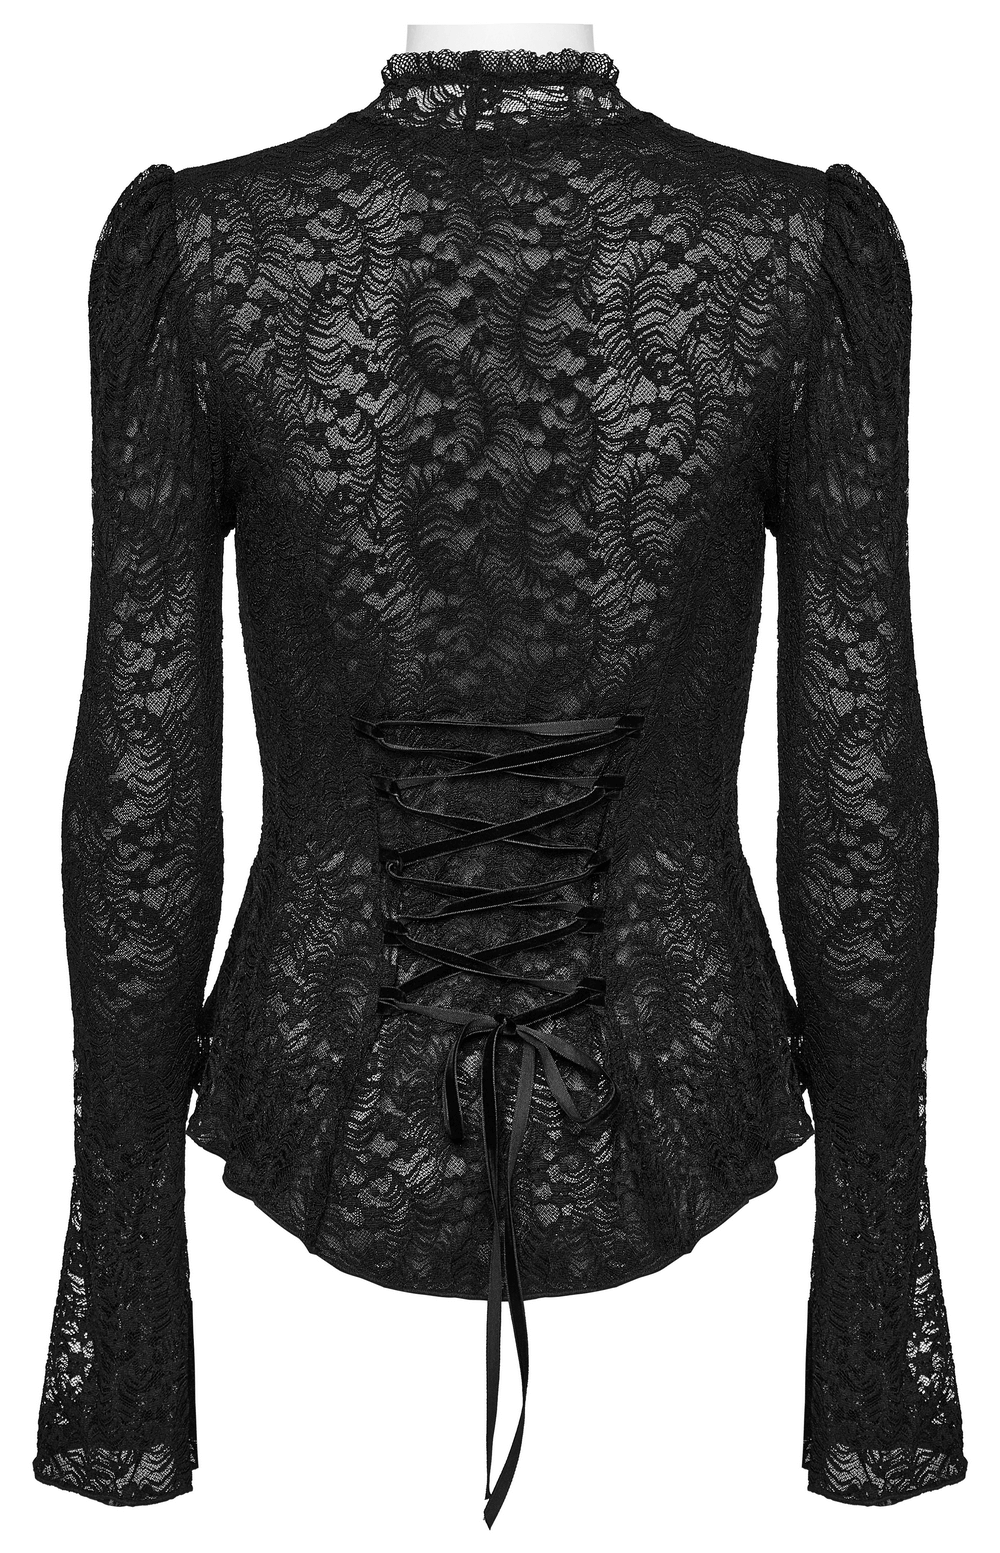 Victorian Women's Lace Gothic Top with Mesh Detail - HARD'N'HEAVY